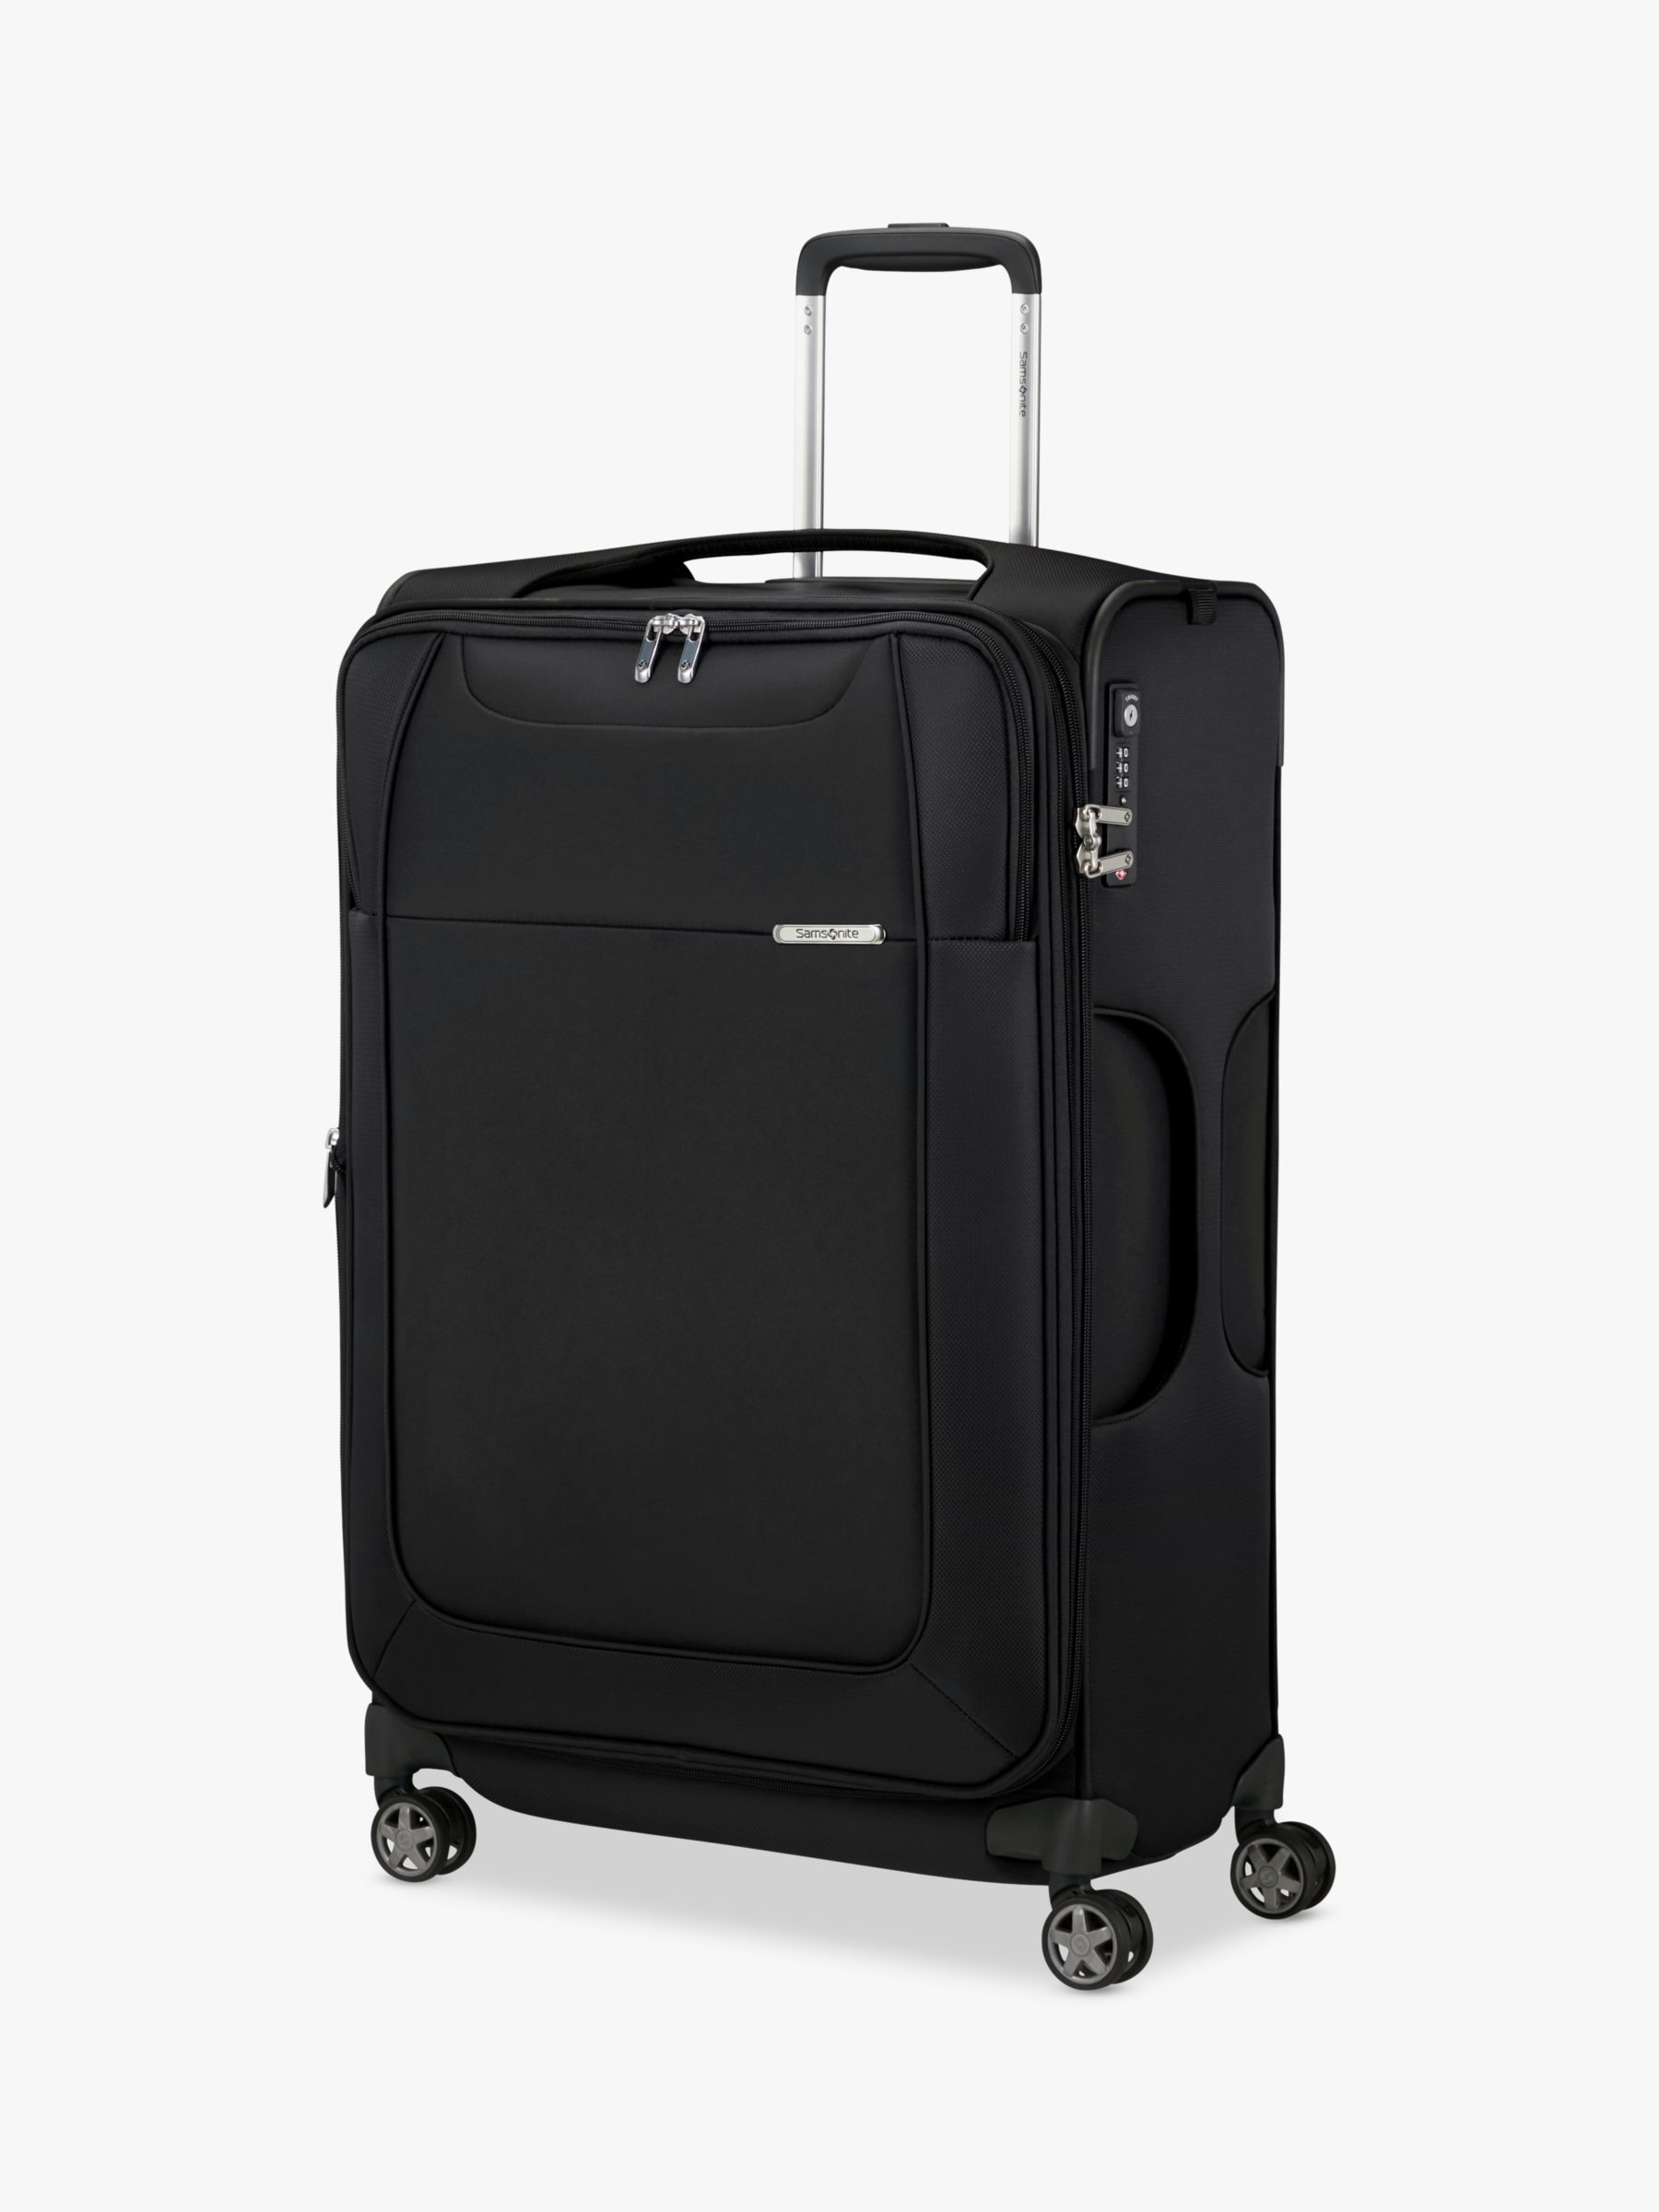 Soft sided suitcases